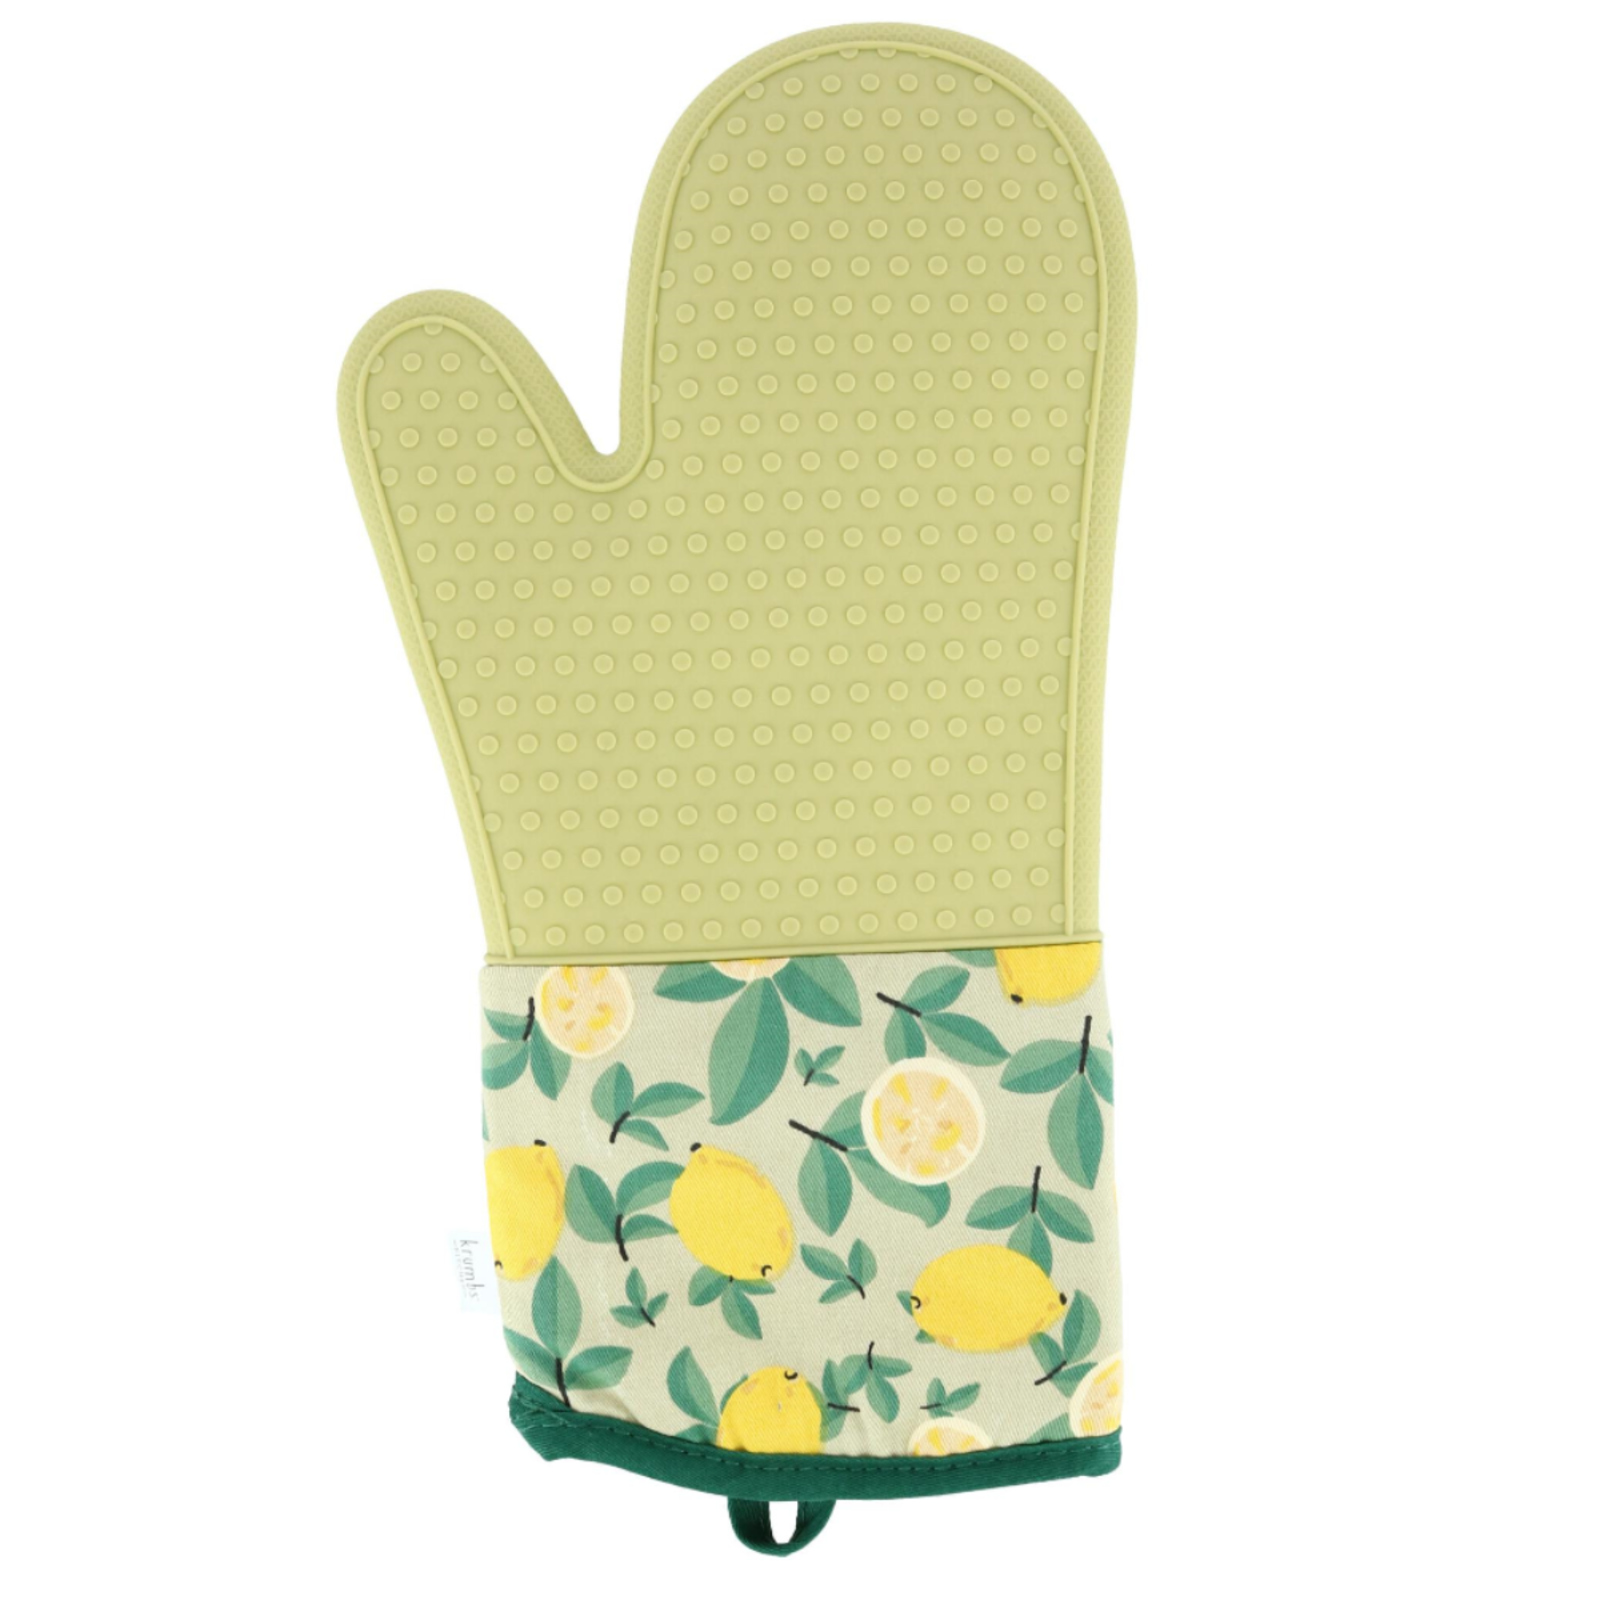 Krumbs Kitchen Farmhouse Collection  Silicone Oven Mitts  by Krumbs Kitchen®   KKFHOM loading=